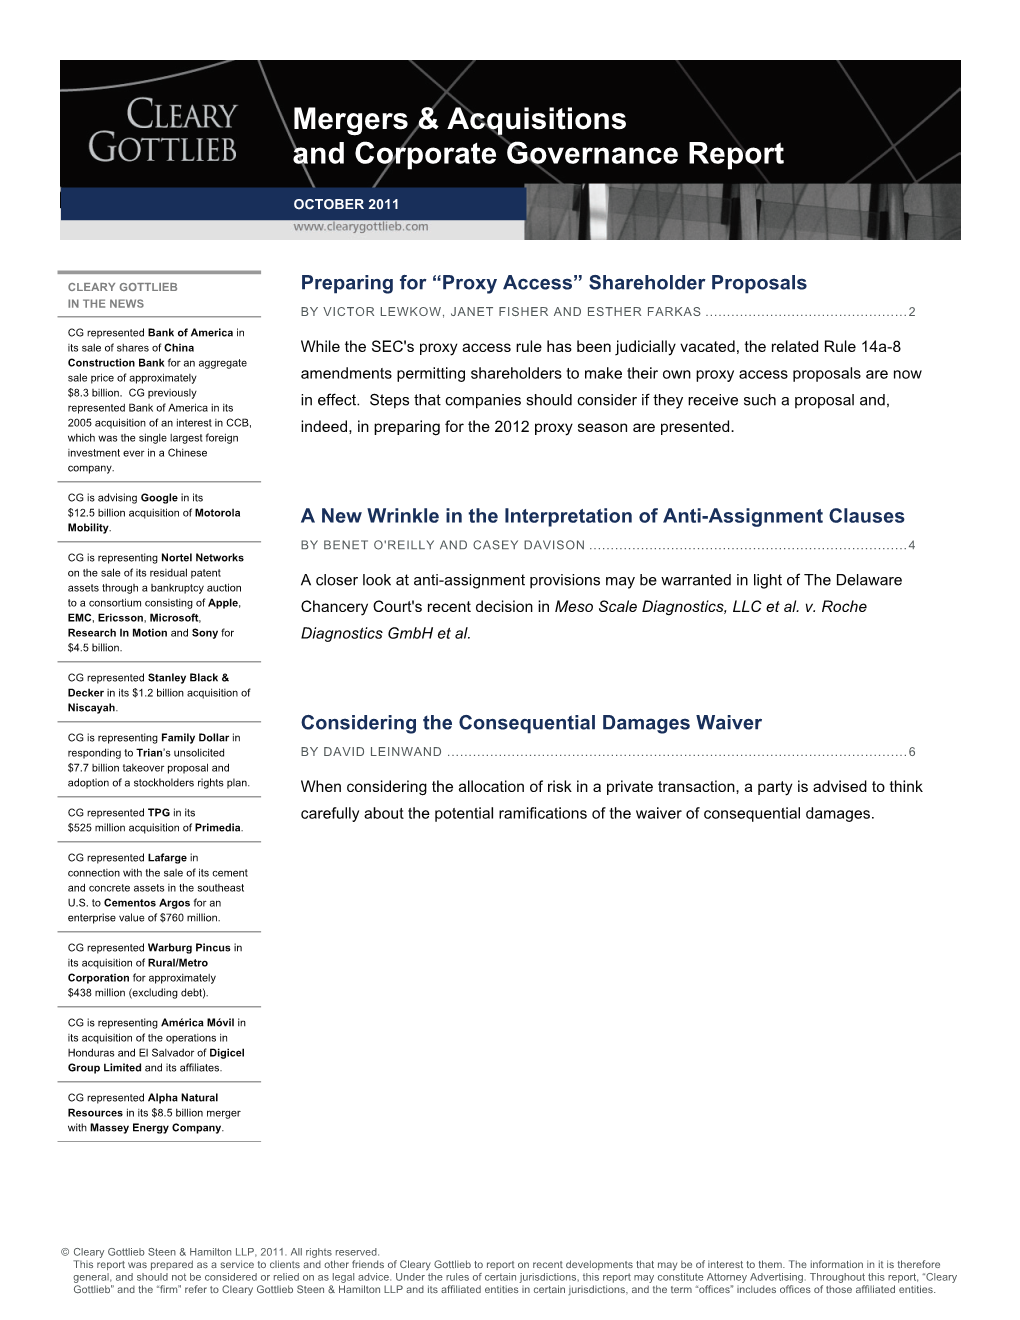 Mergers & Acquisitions and Corporate Governance Report